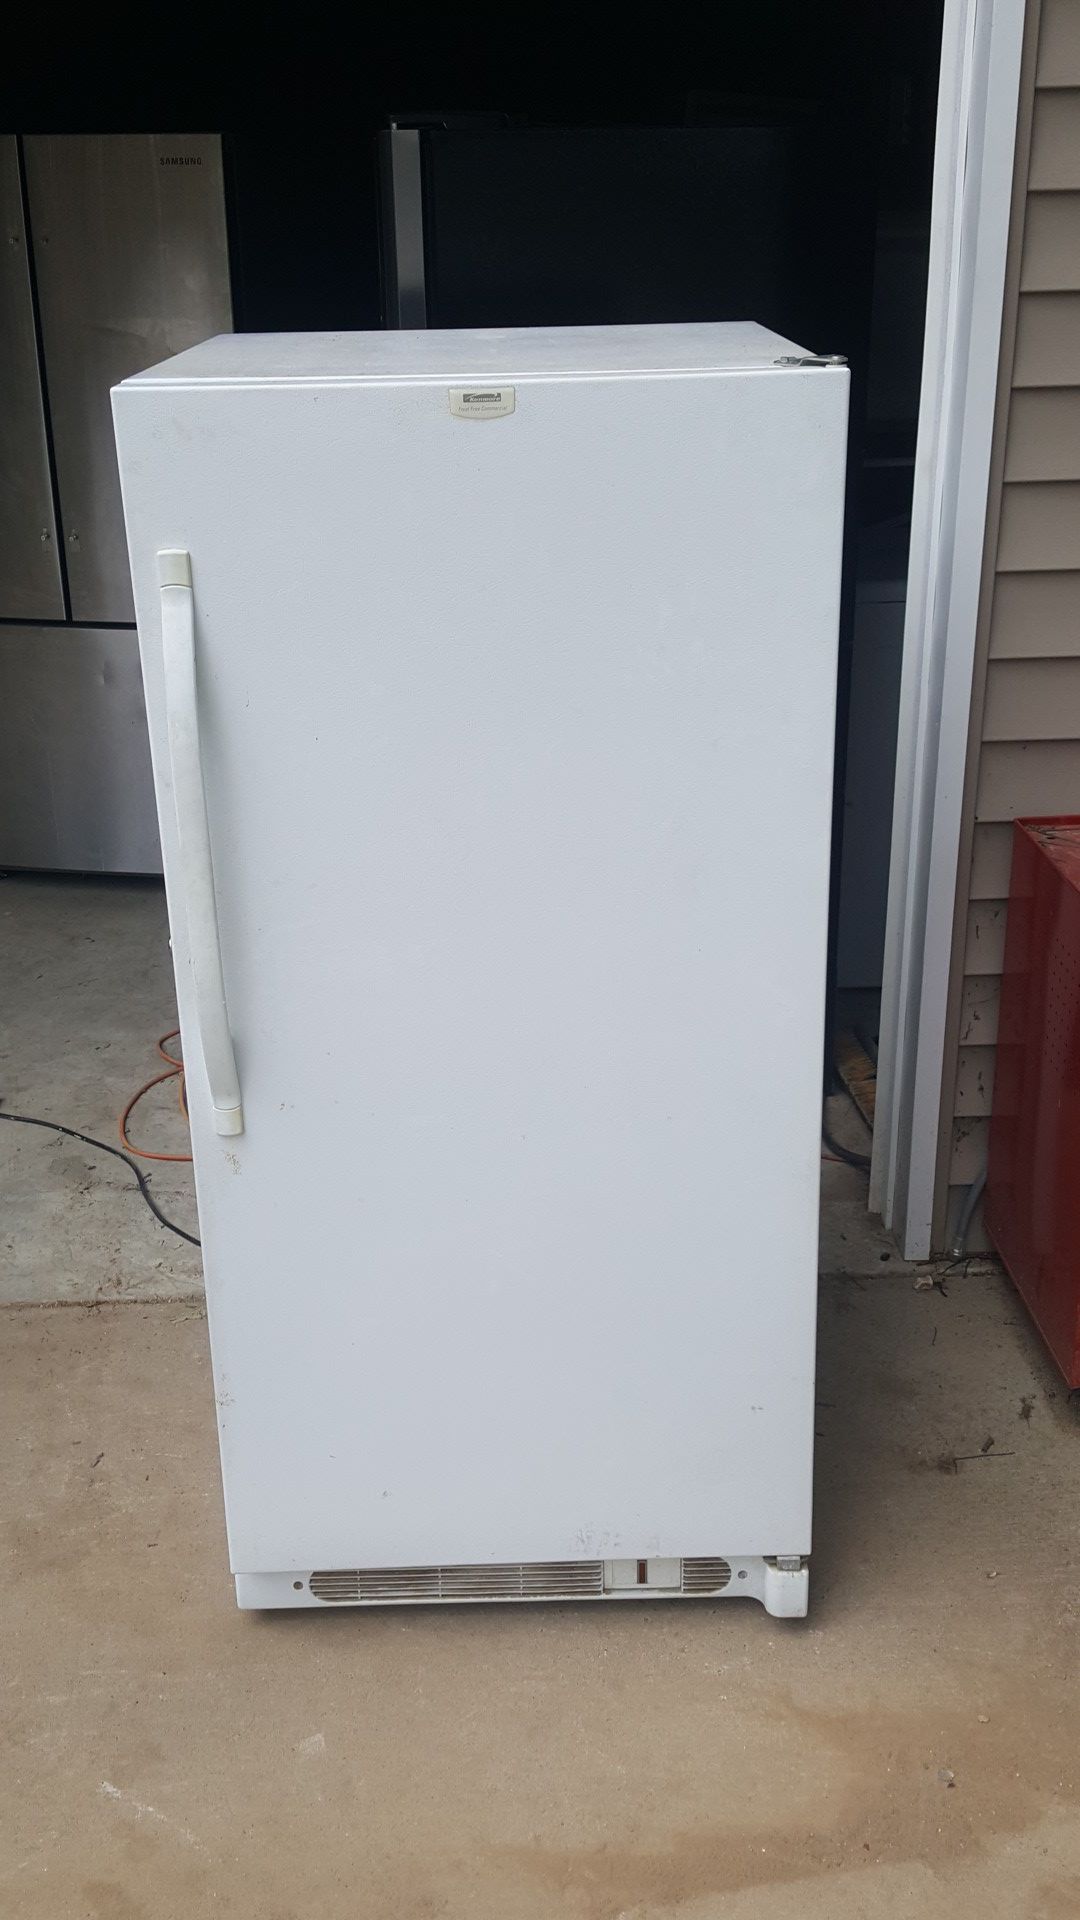 Kenmore upright frost free freezer Works great